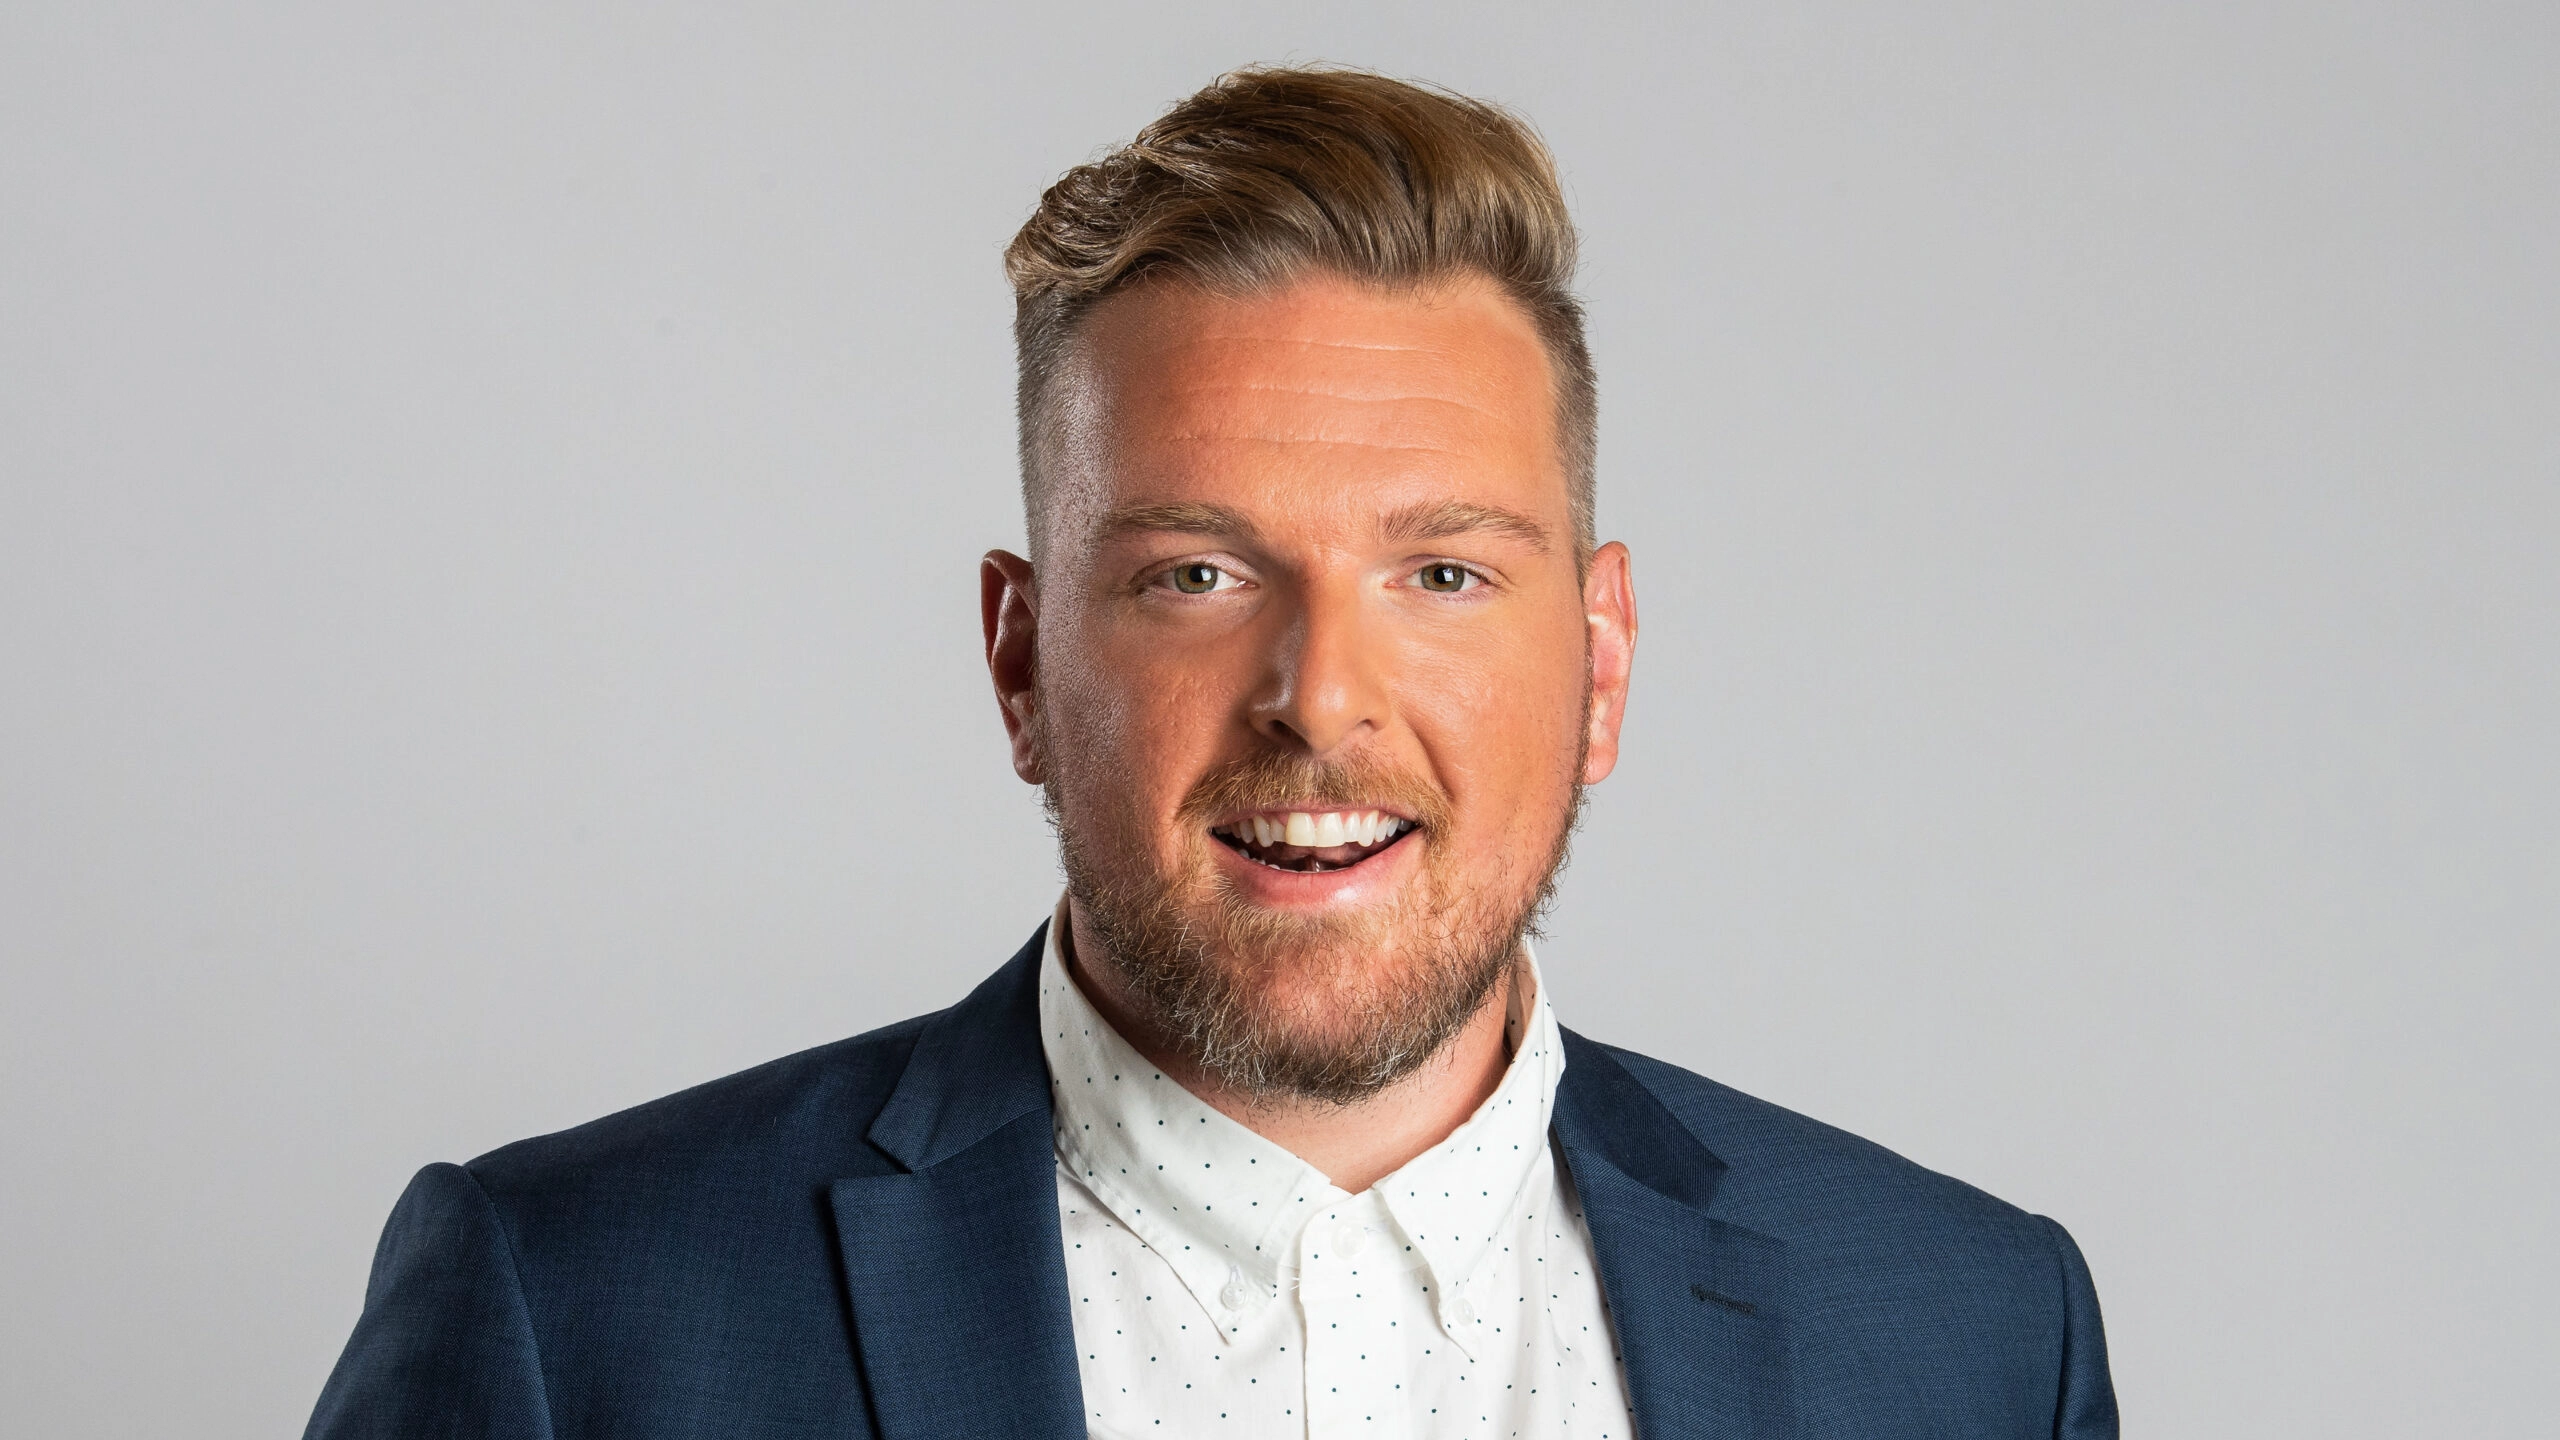 What Marketers Can Learn from Pat McAfee's Success - MarketScale